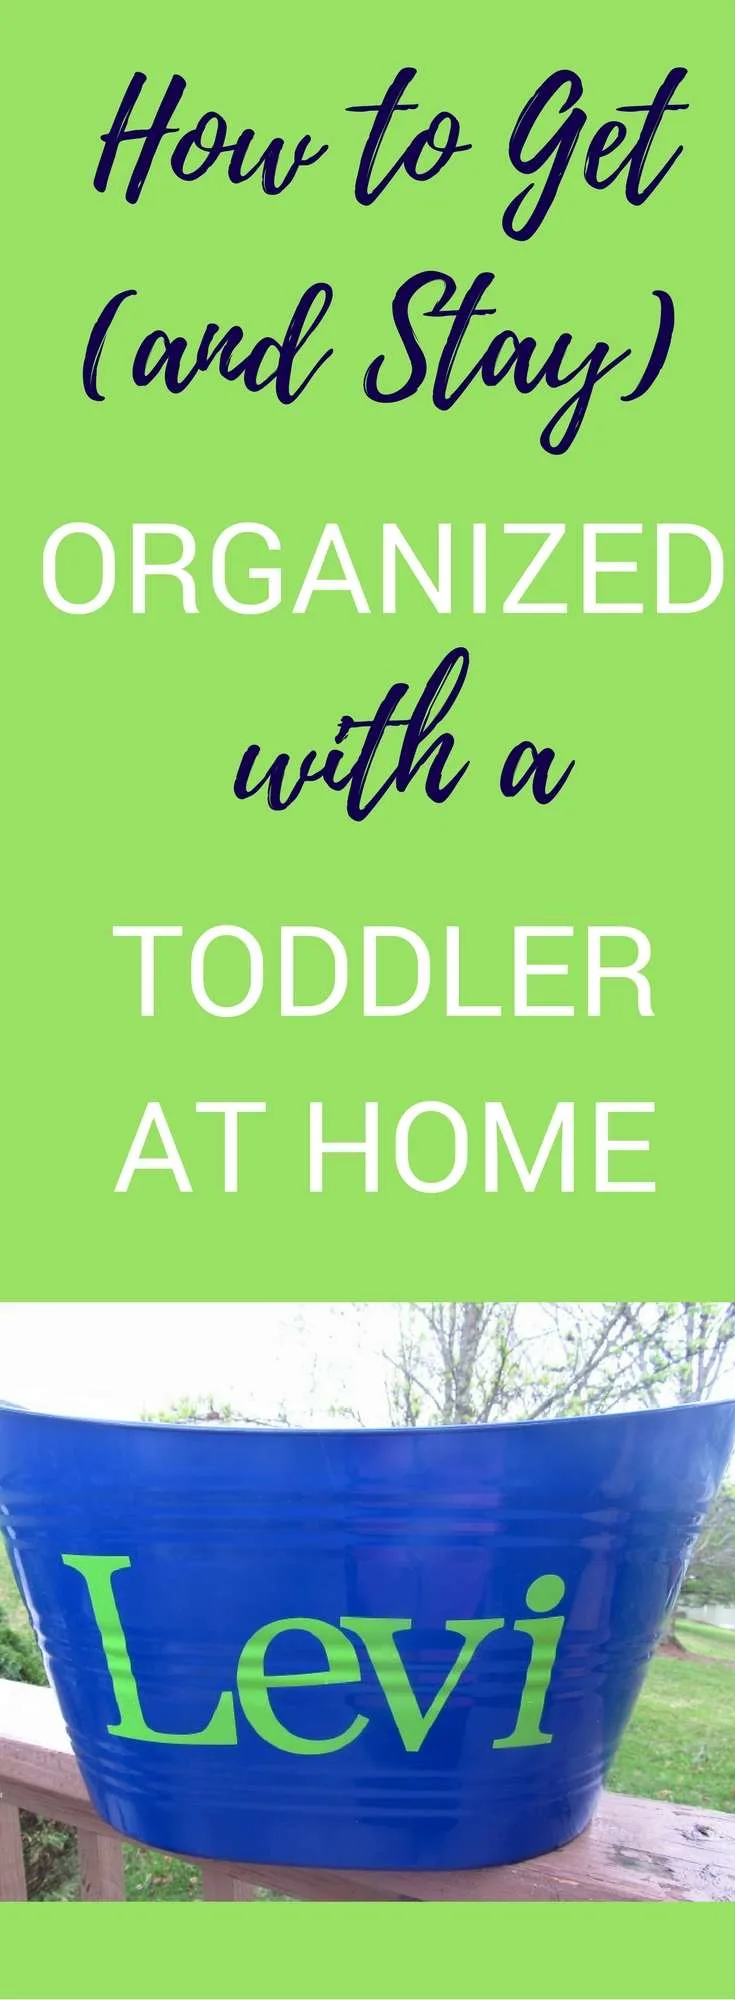 How to Get and Stay Organized With a Toddler at Home | Get organized | Organize Your Home | Toddler | Parenting Tips | Stay at home Mom 